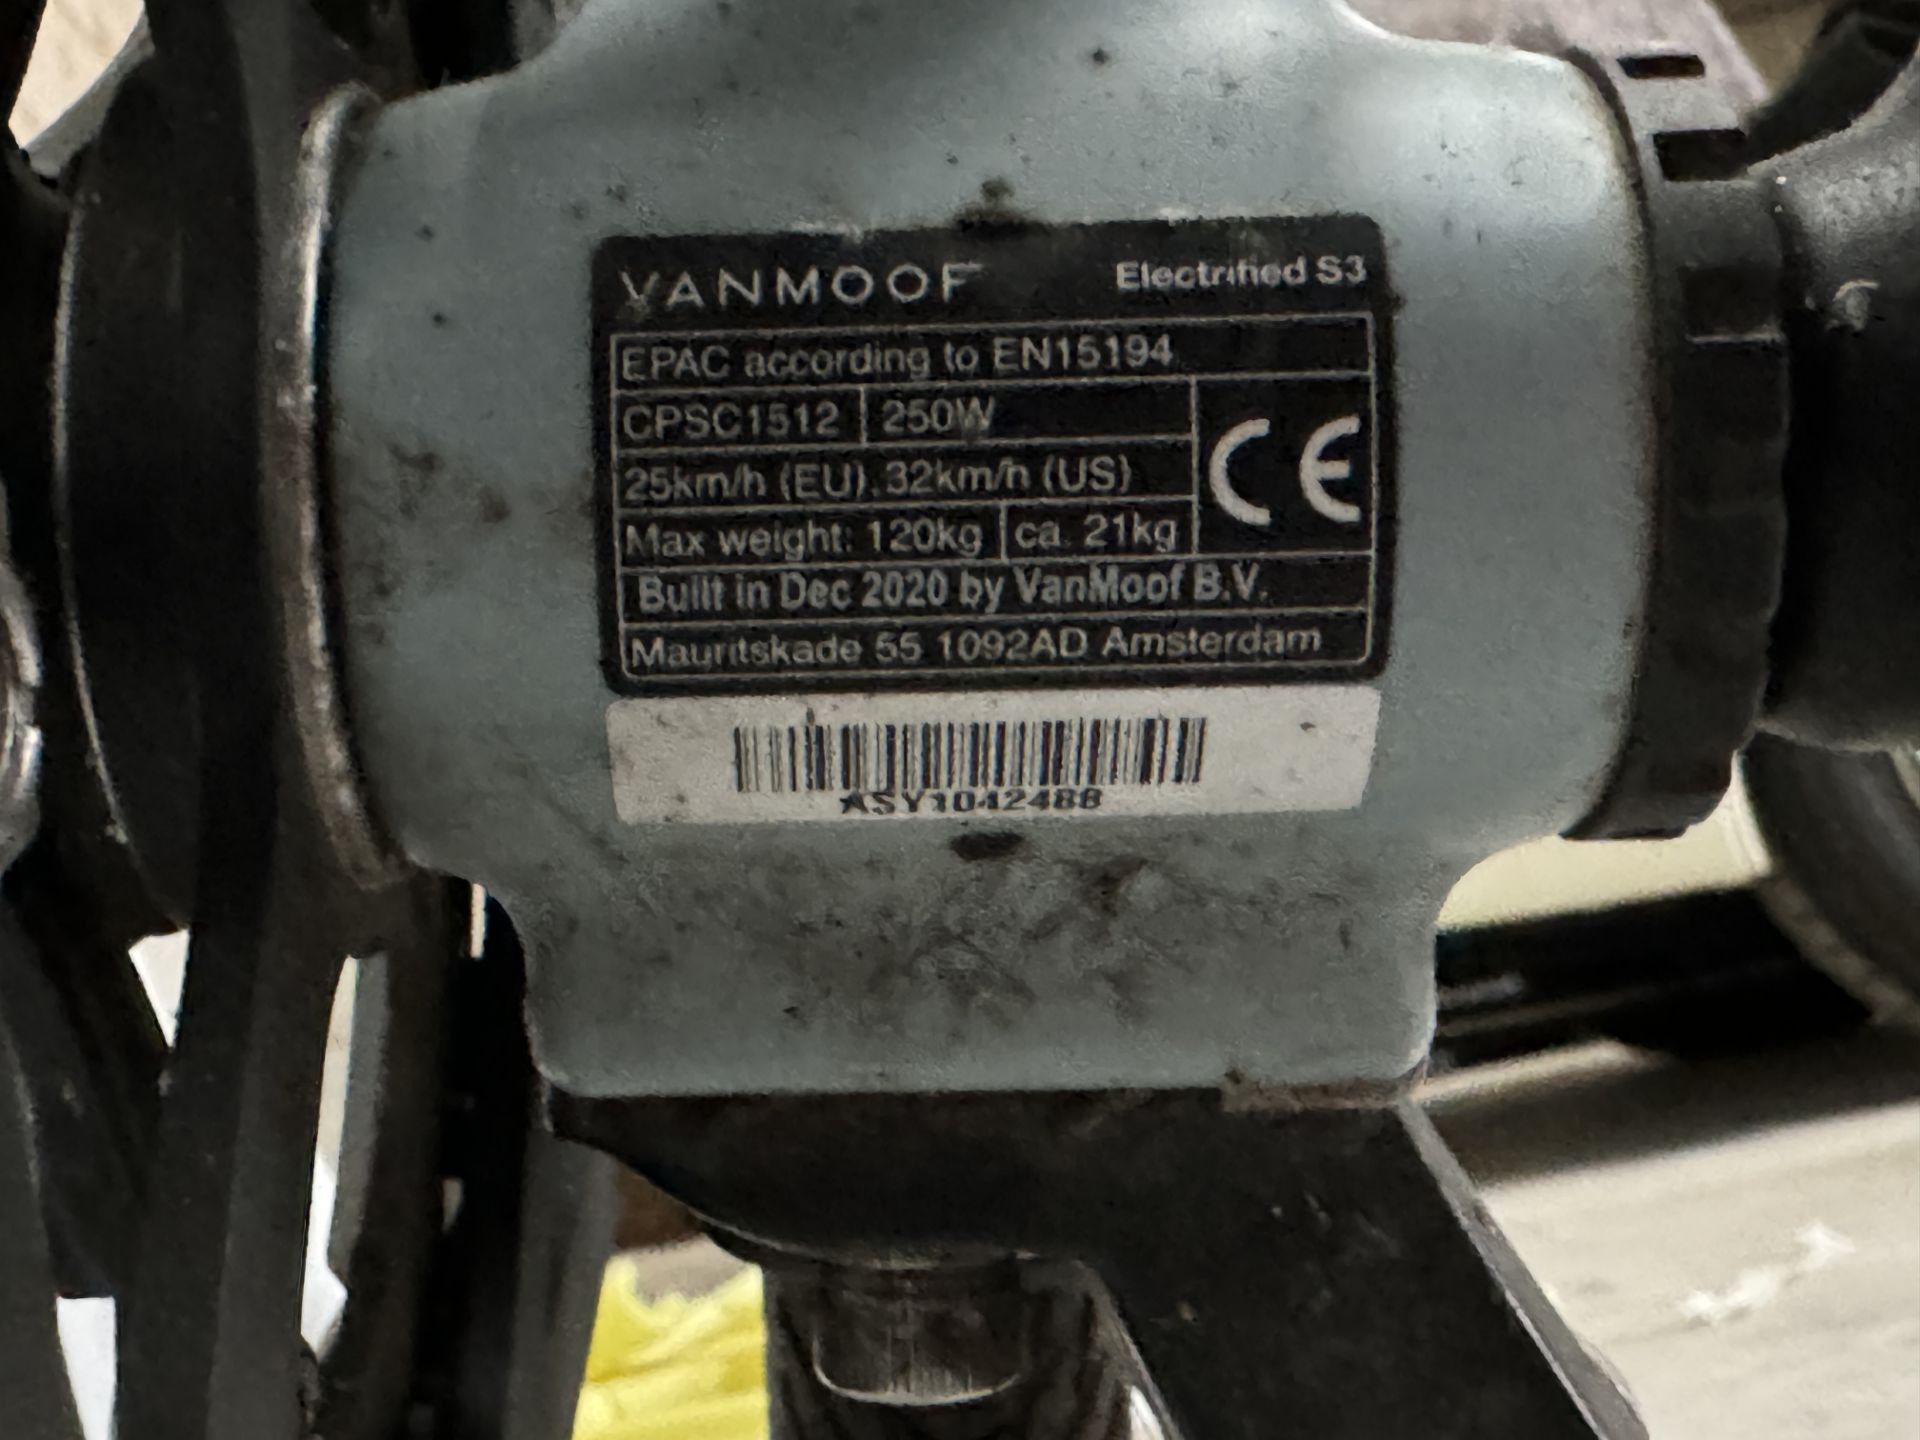 VanMoof S3 Electric Bike, Frame Number ASY1042488 (NOT ROADWORTHY - FOR SPARES ONLY) (No codes - Image 2 of 2